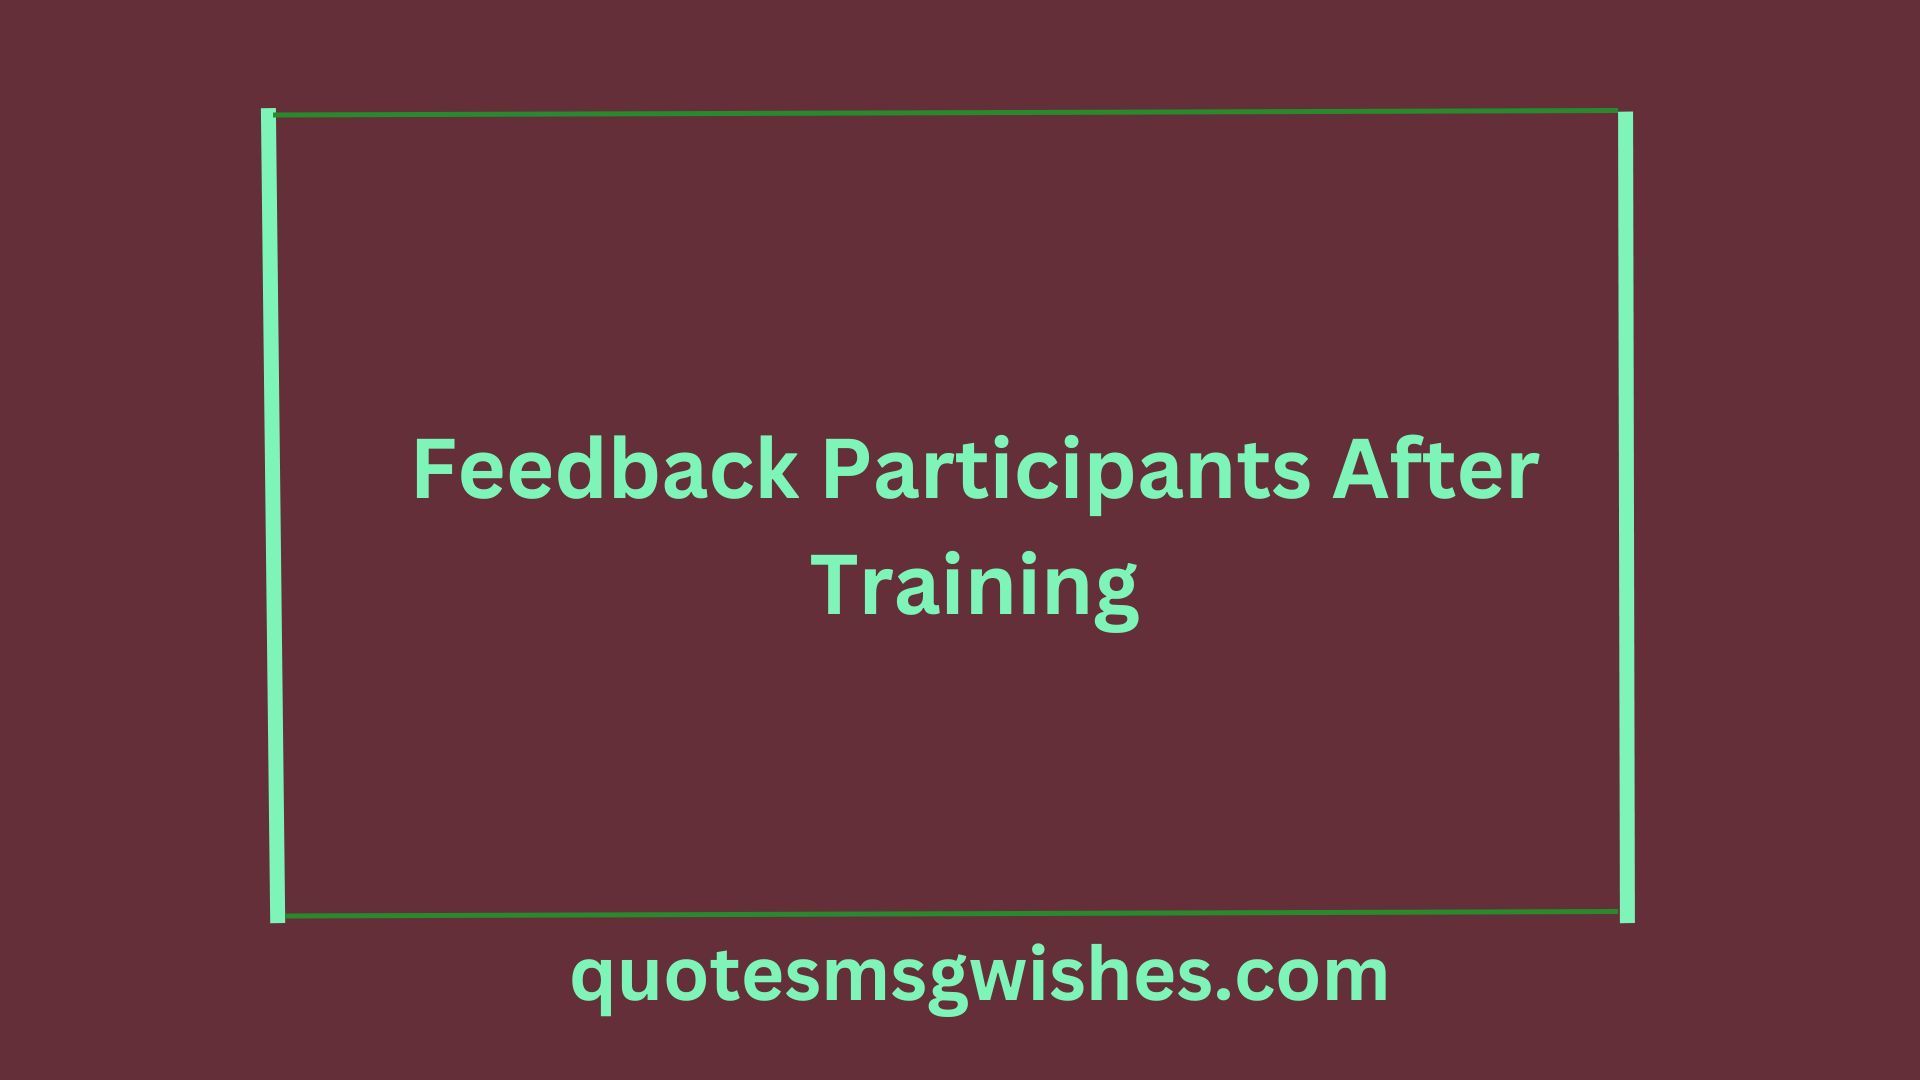 Feedback Participants After Training